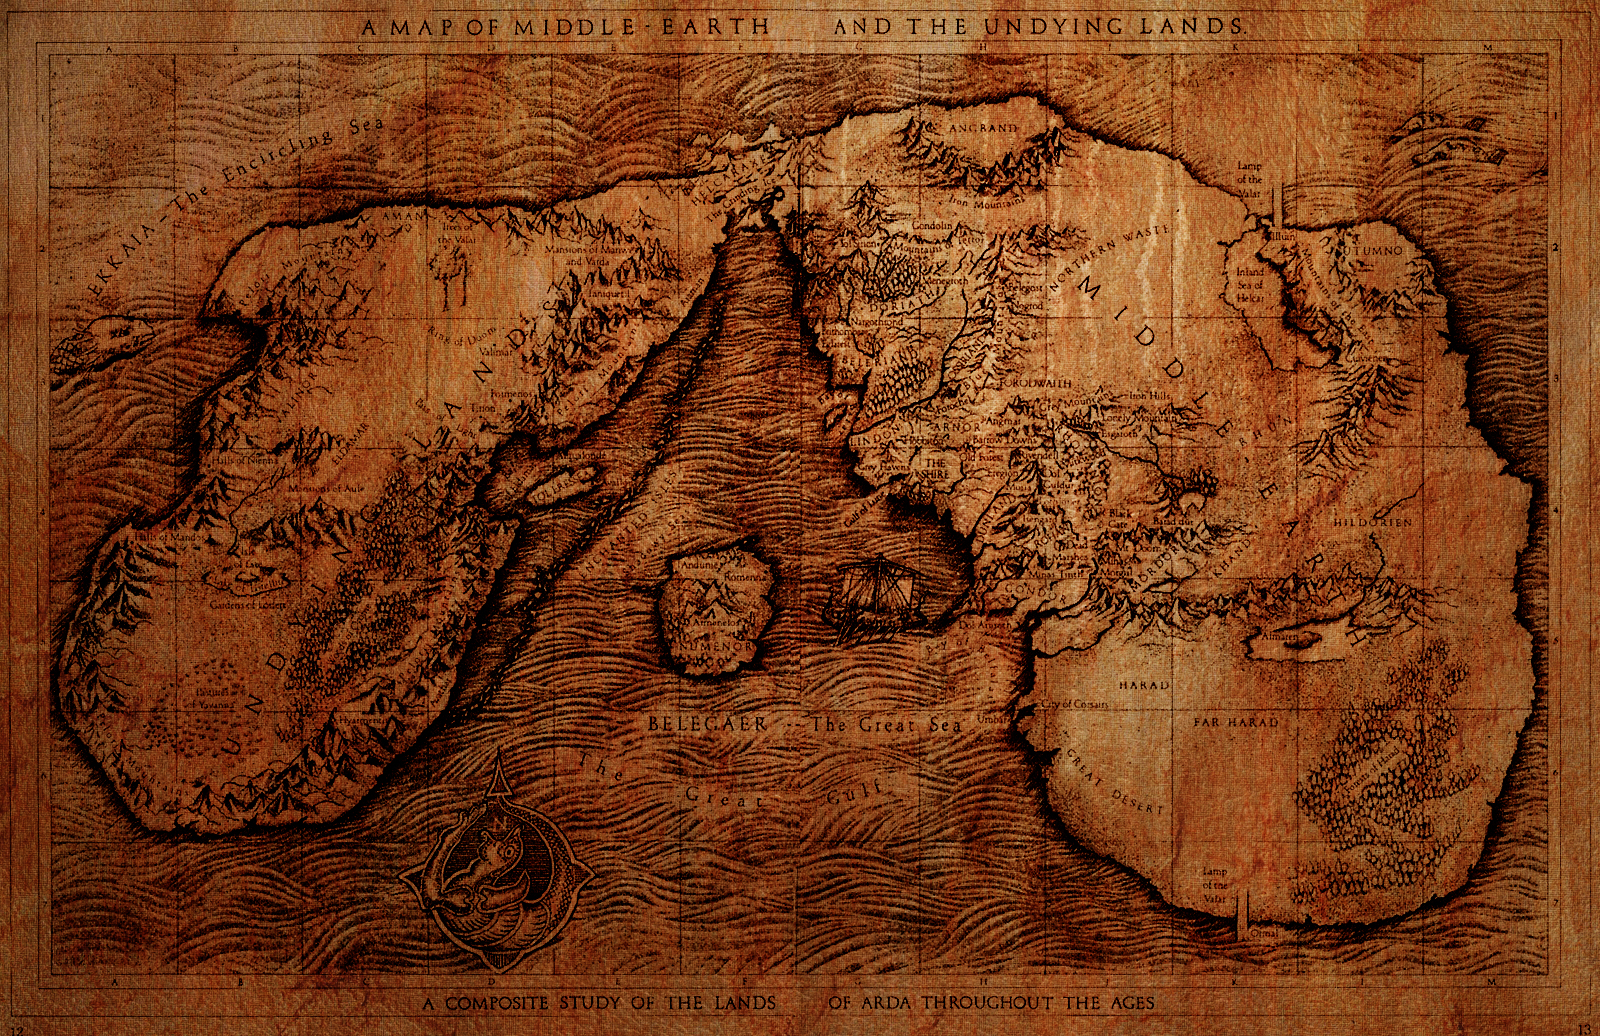 Map of Middle Earth And The Undying Lands by CorvusCorax92 on 1600x1036